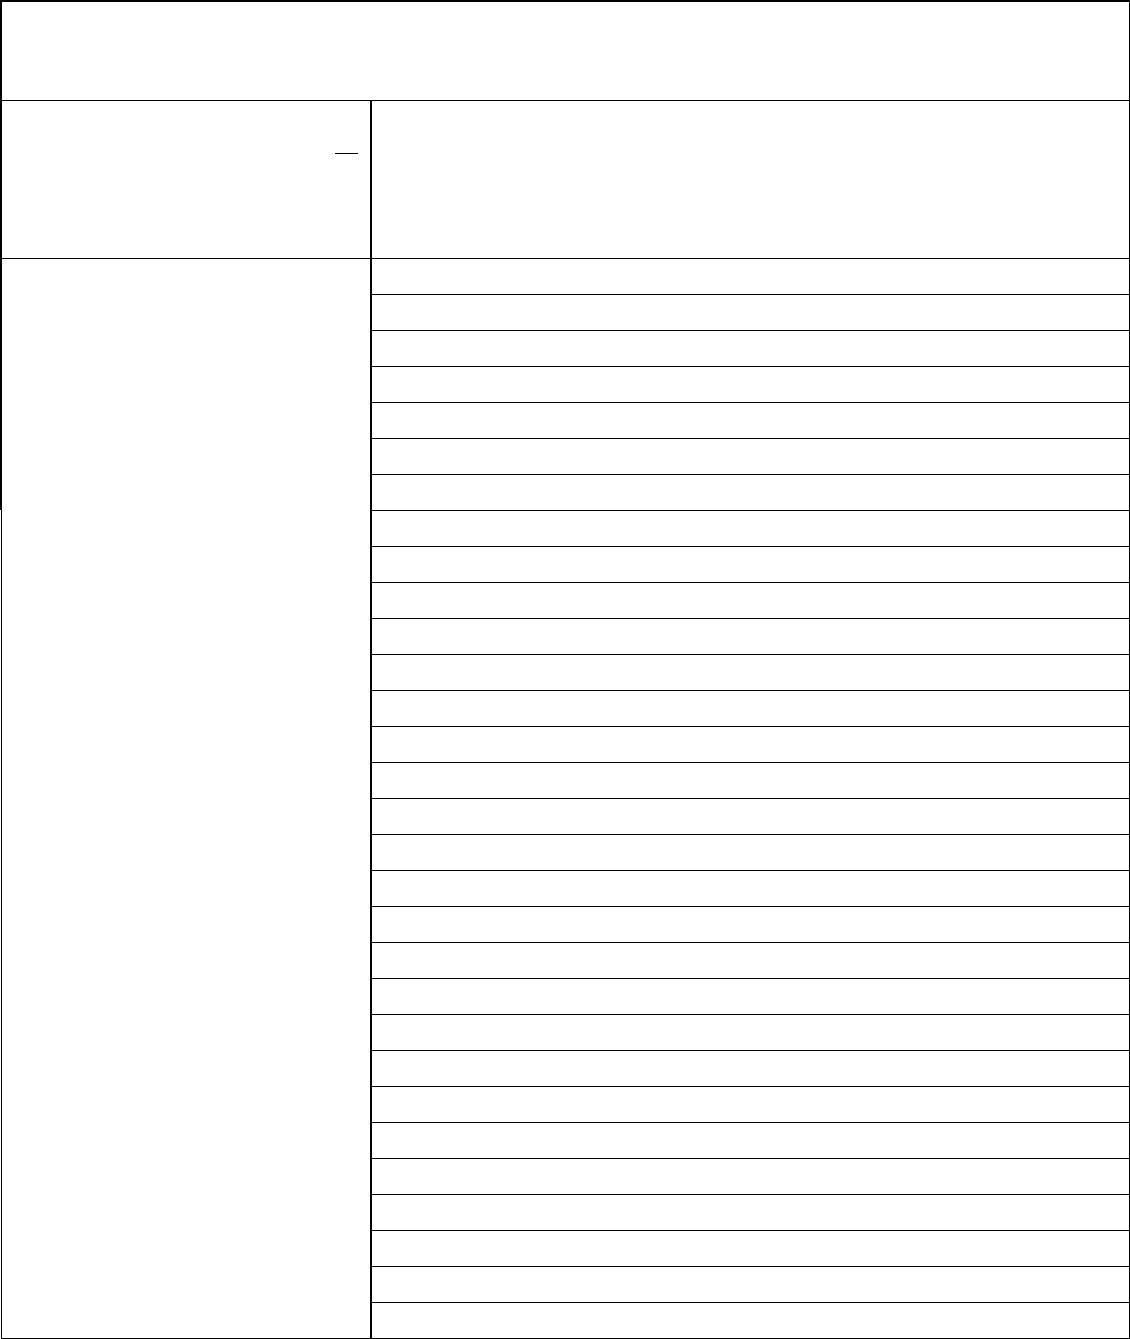 Cornell Notes Template In Word And Pdf Formats Pertaining To Cornell Note Template Word